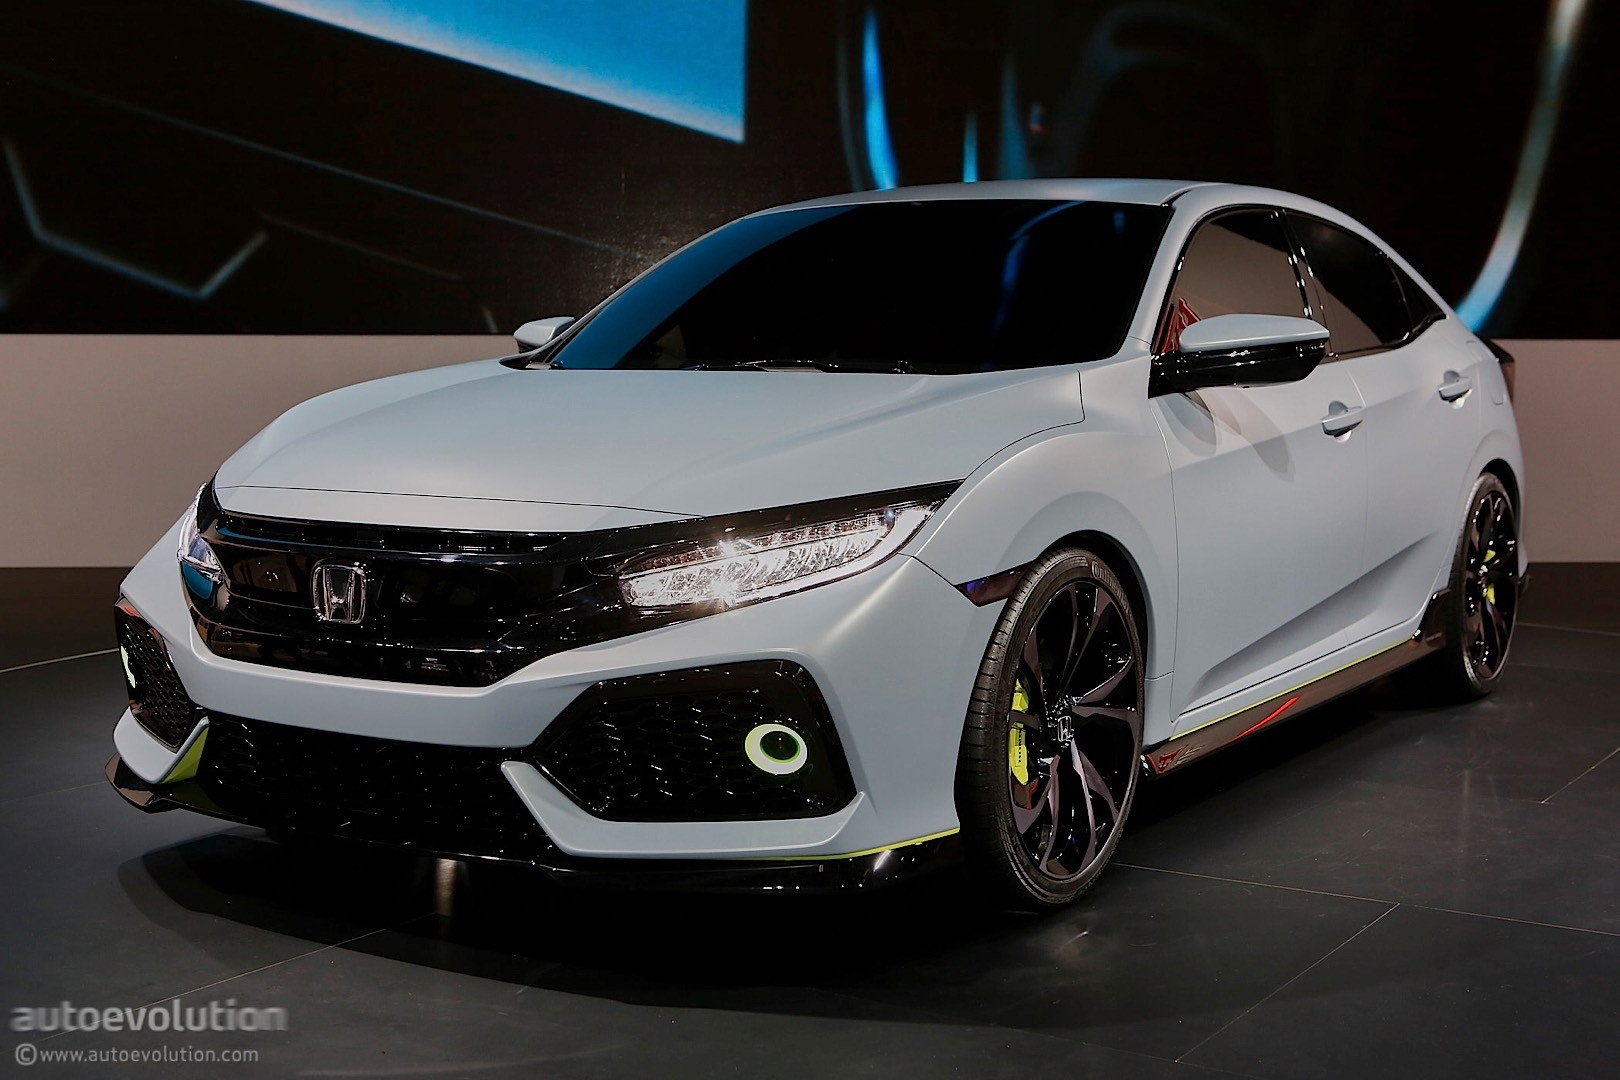 honda-civic-hatchback-coming-to-new-york-civic-si-and-new-type-r-in-2017_12.jpg